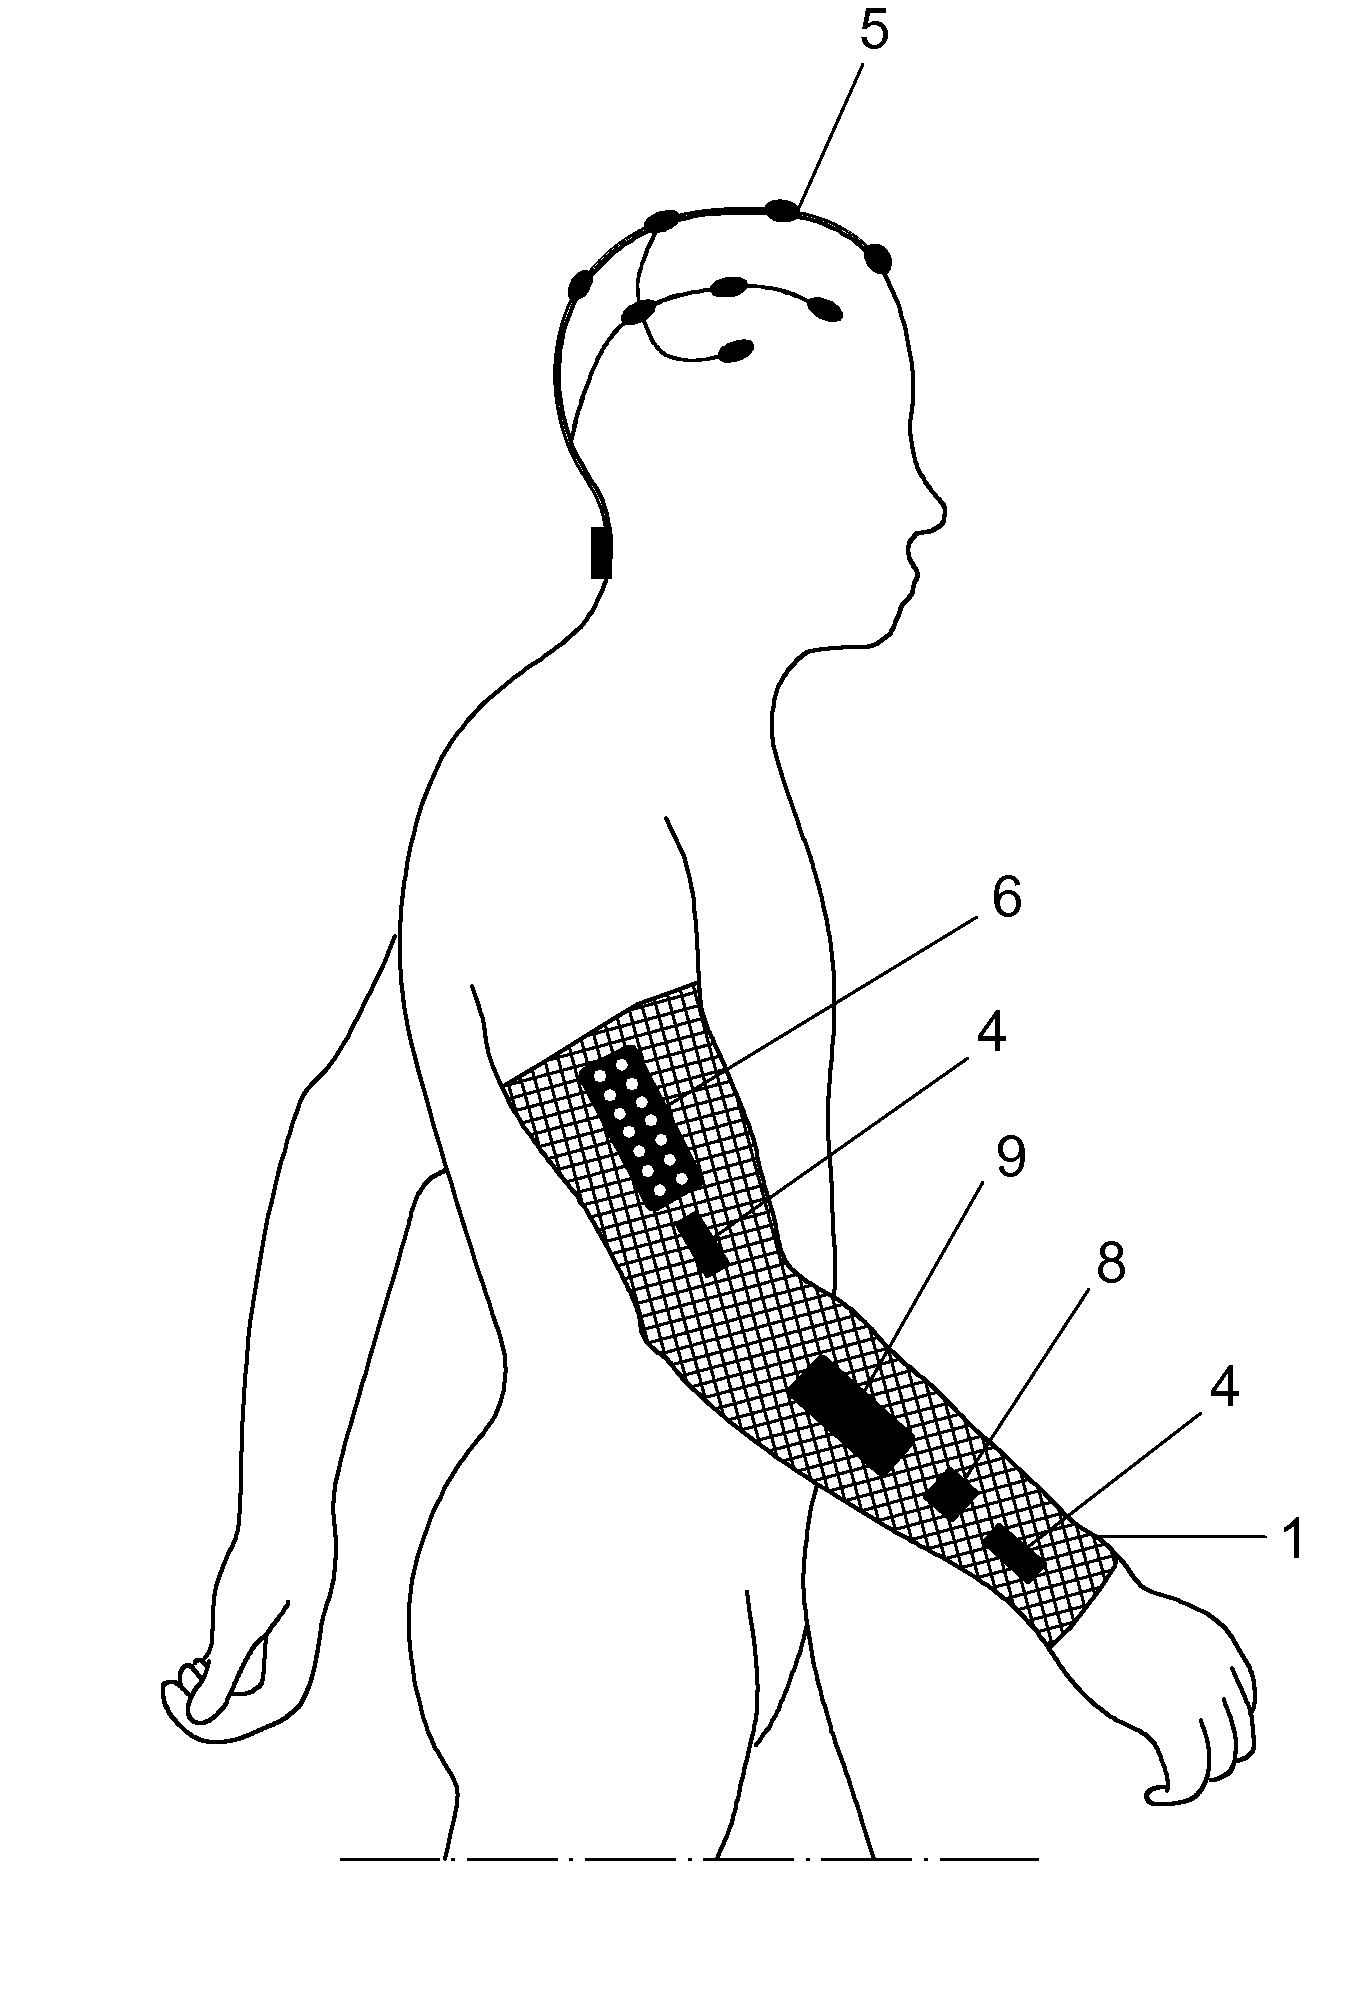 Method and neuroprosthetic device for monitoring and suppression of pathological tremors through neurostimulation of the afferent pathways